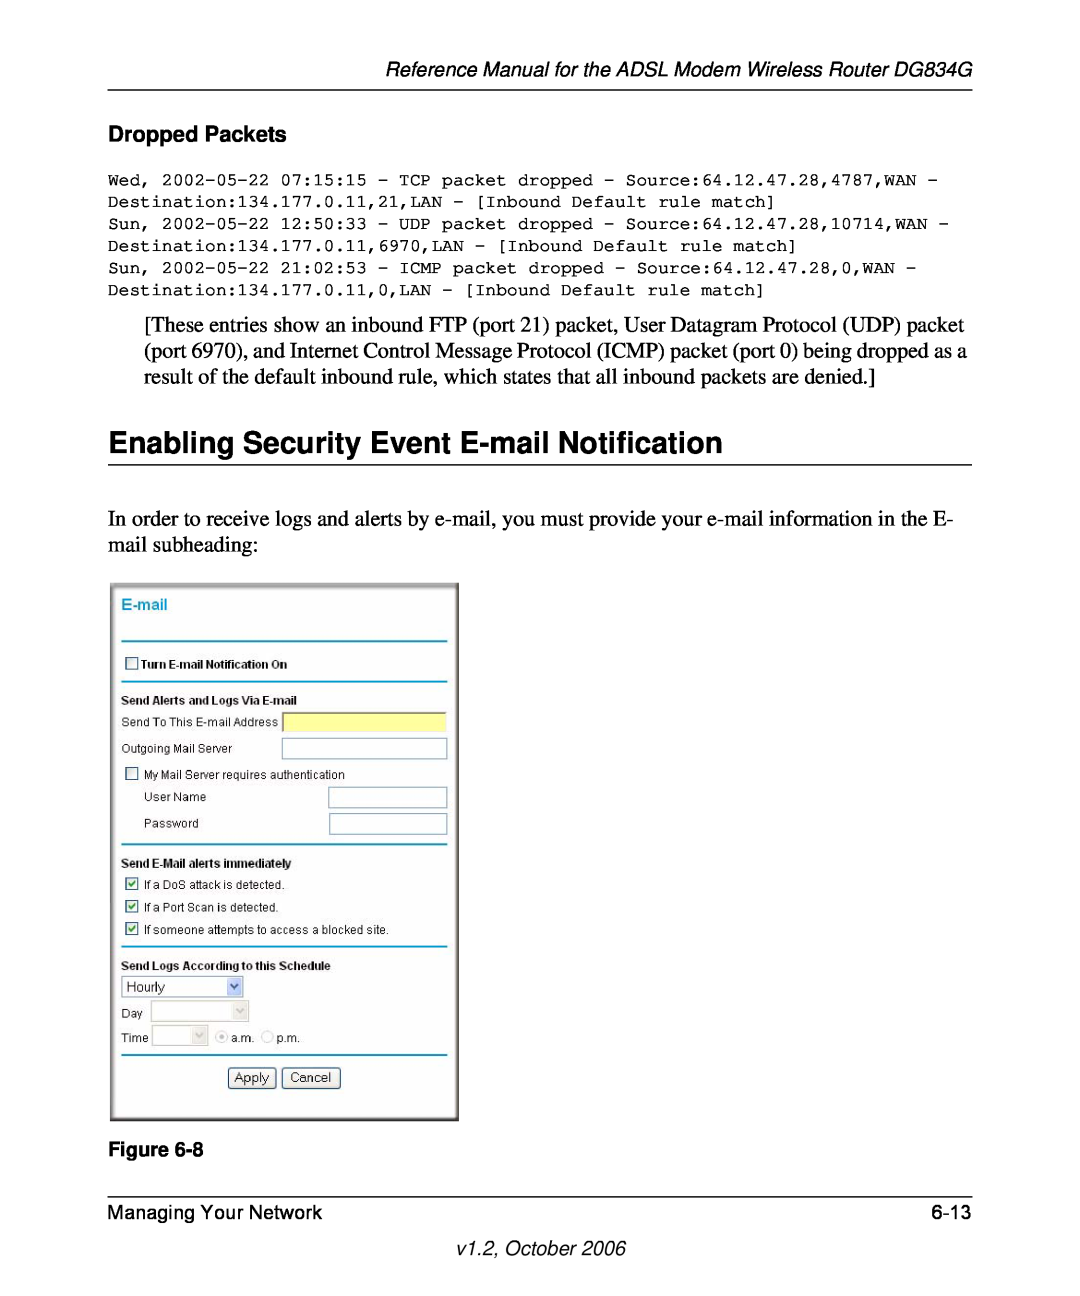 NETGEAR DG834G manual Enabling Security Event E-mail Notification, Dropped Packets 